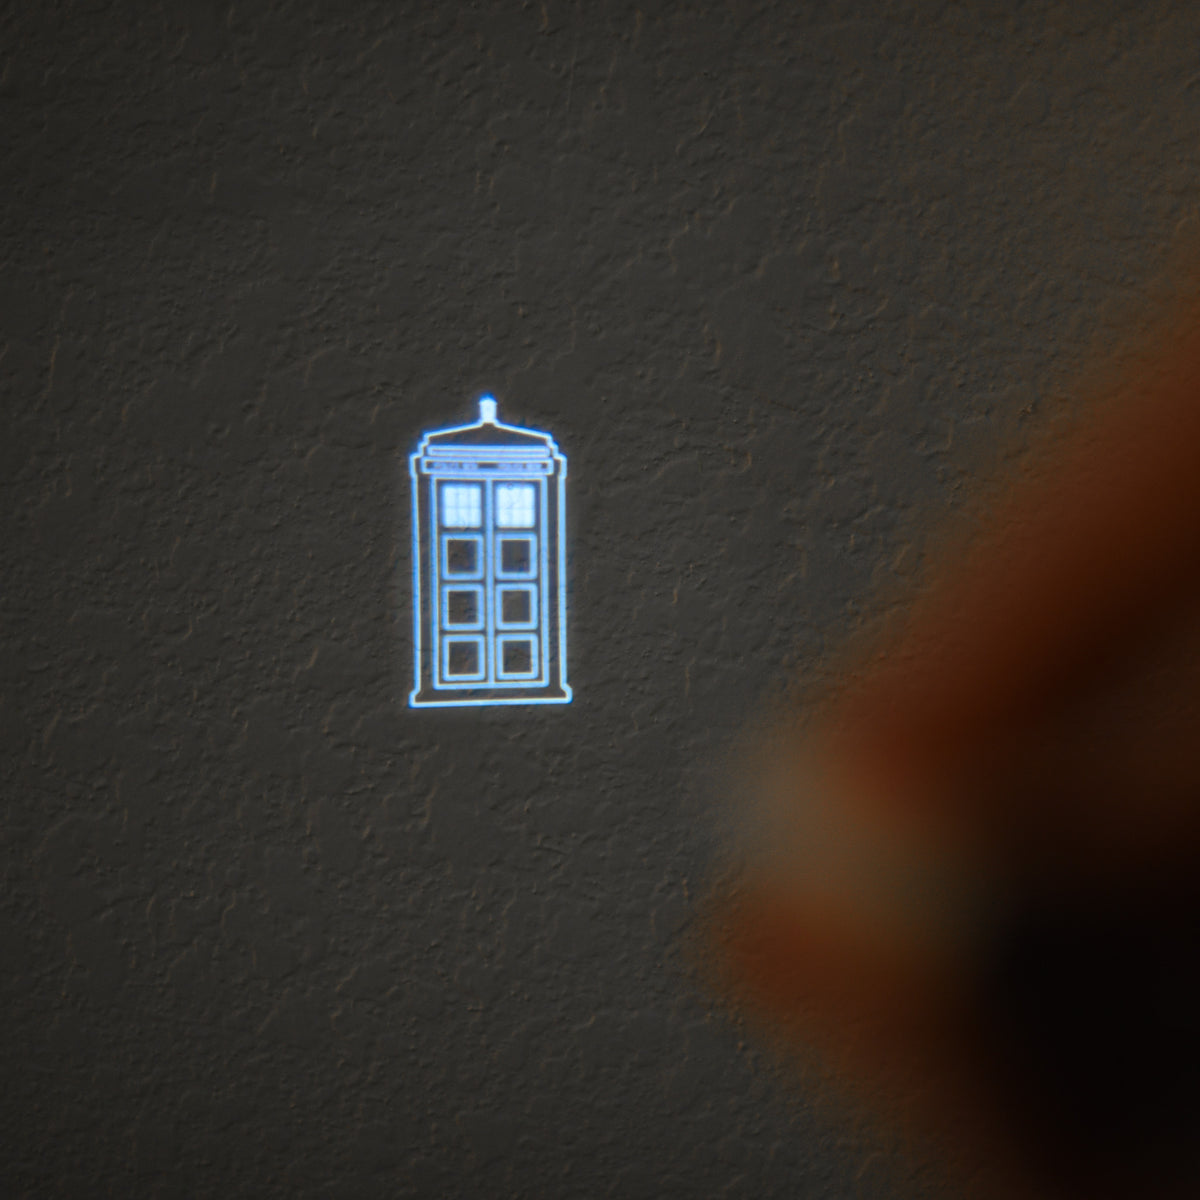 The projected symbol on a wall of the Blue TARDIS Police Box symbol 